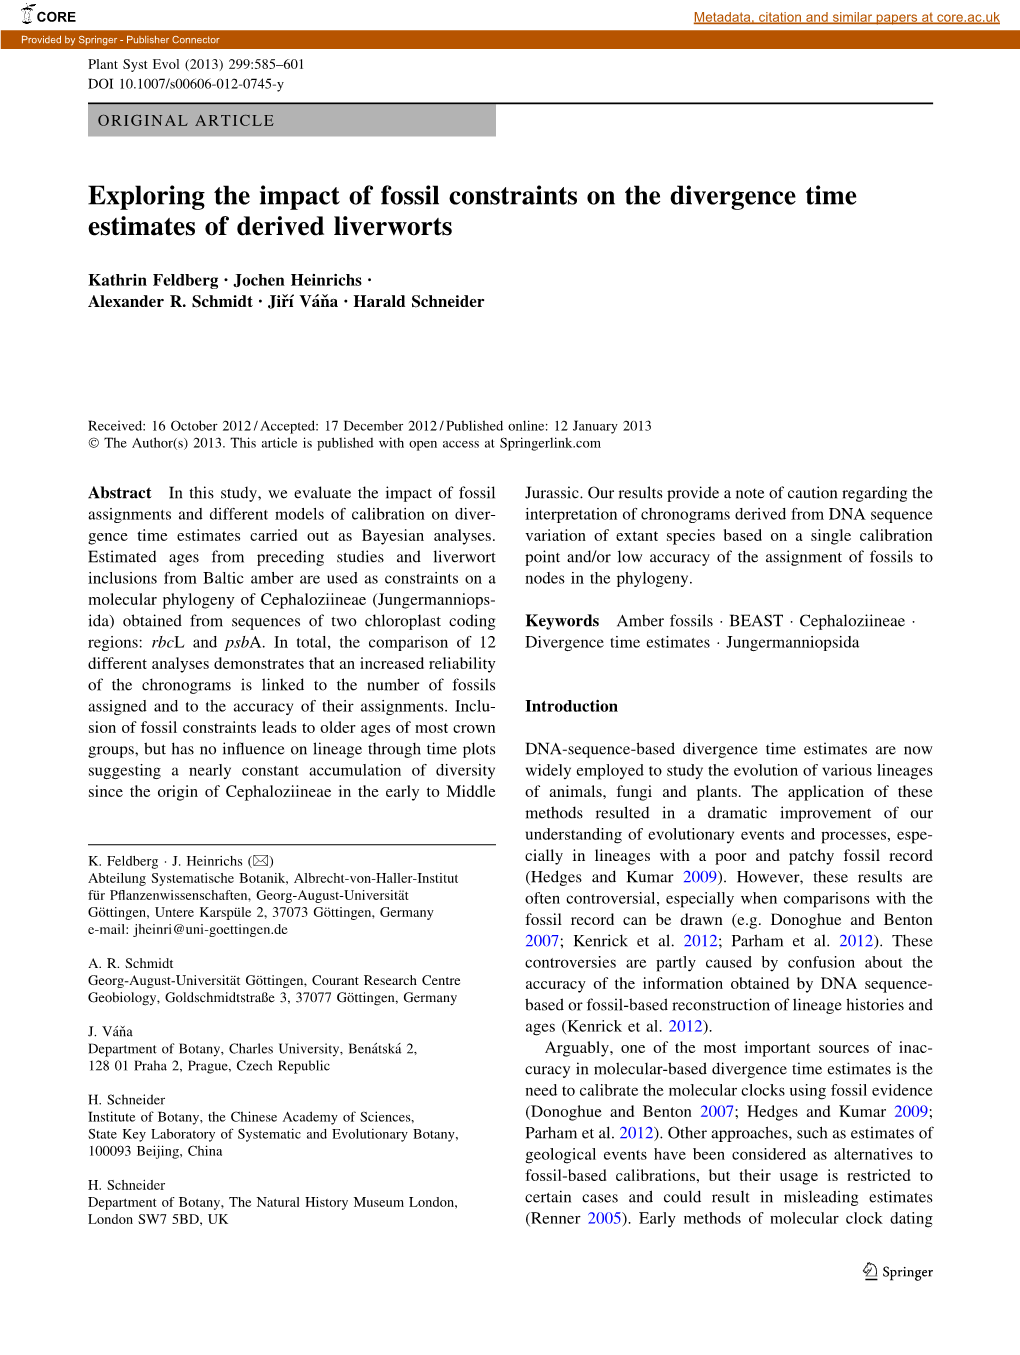 Exploring the Impact of Fossil Constraints on the Divergence Time Estimates of Derived Liverworts